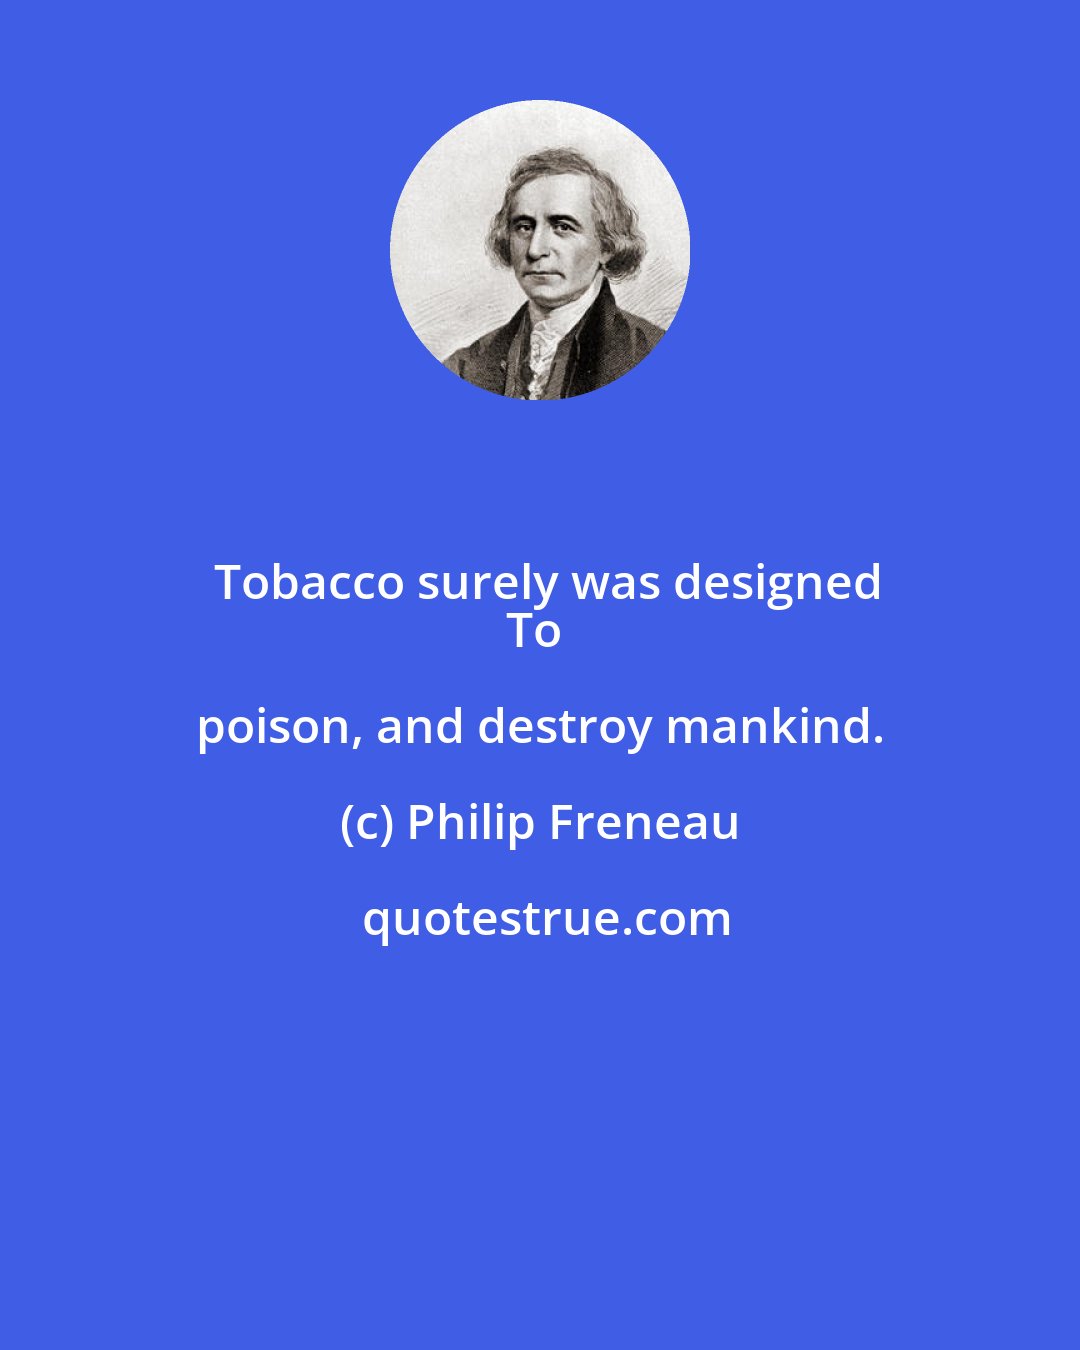 Philip Freneau: Tobacco surely was designed
To poison, and destroy mankind.